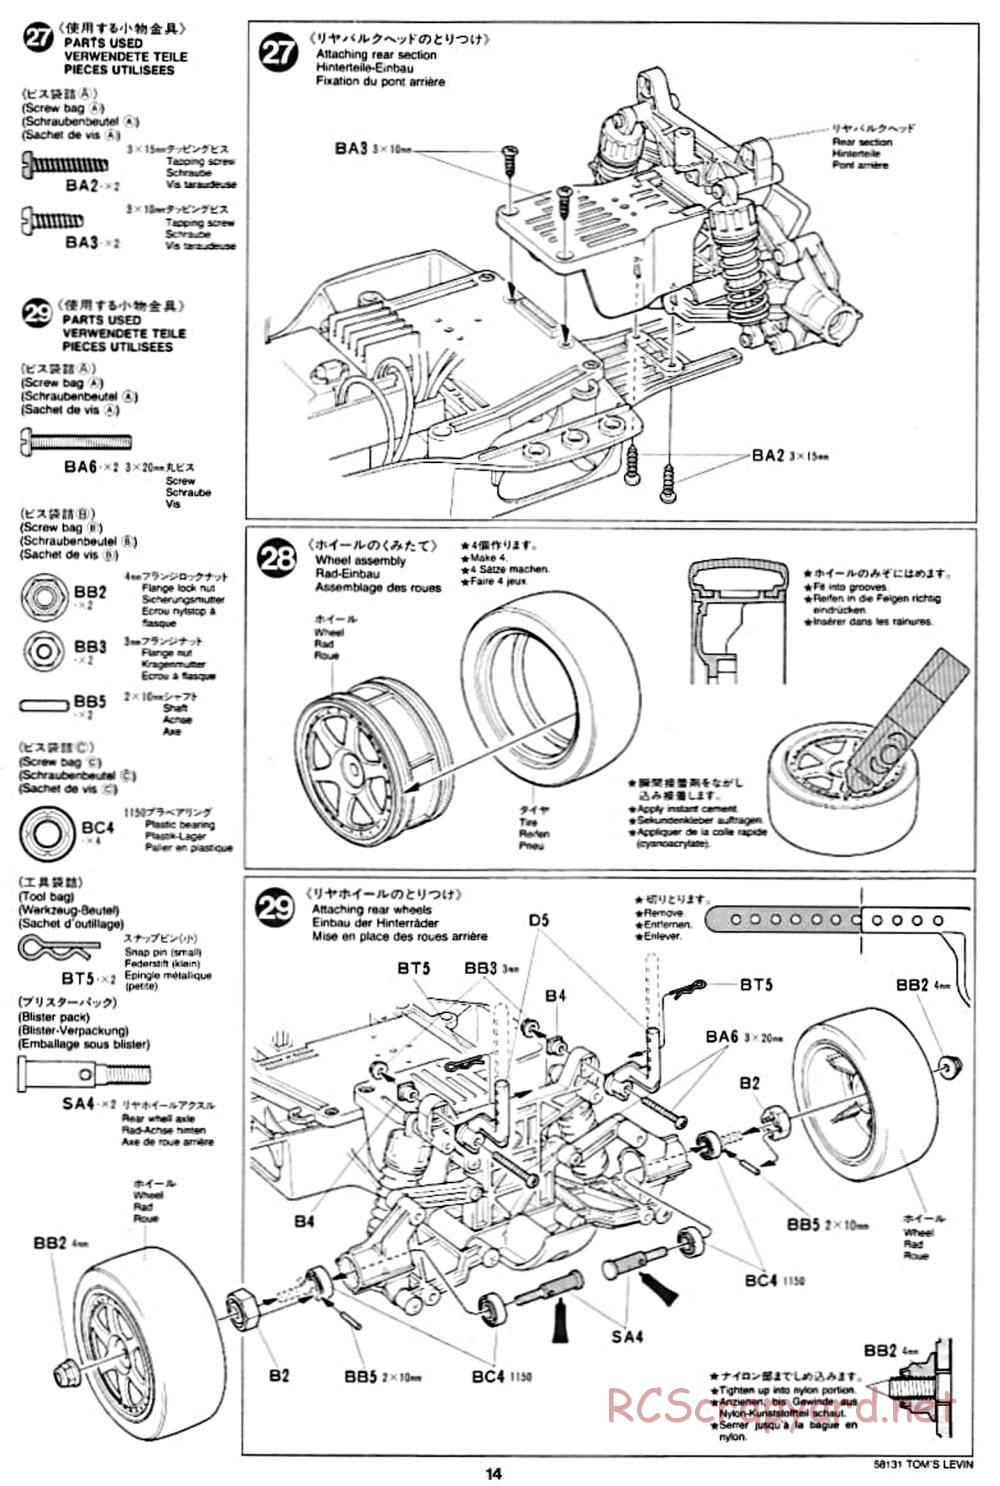 Tamiya - Toyota Tom's Levin - FF-01 Chassis - Manual - Page 14